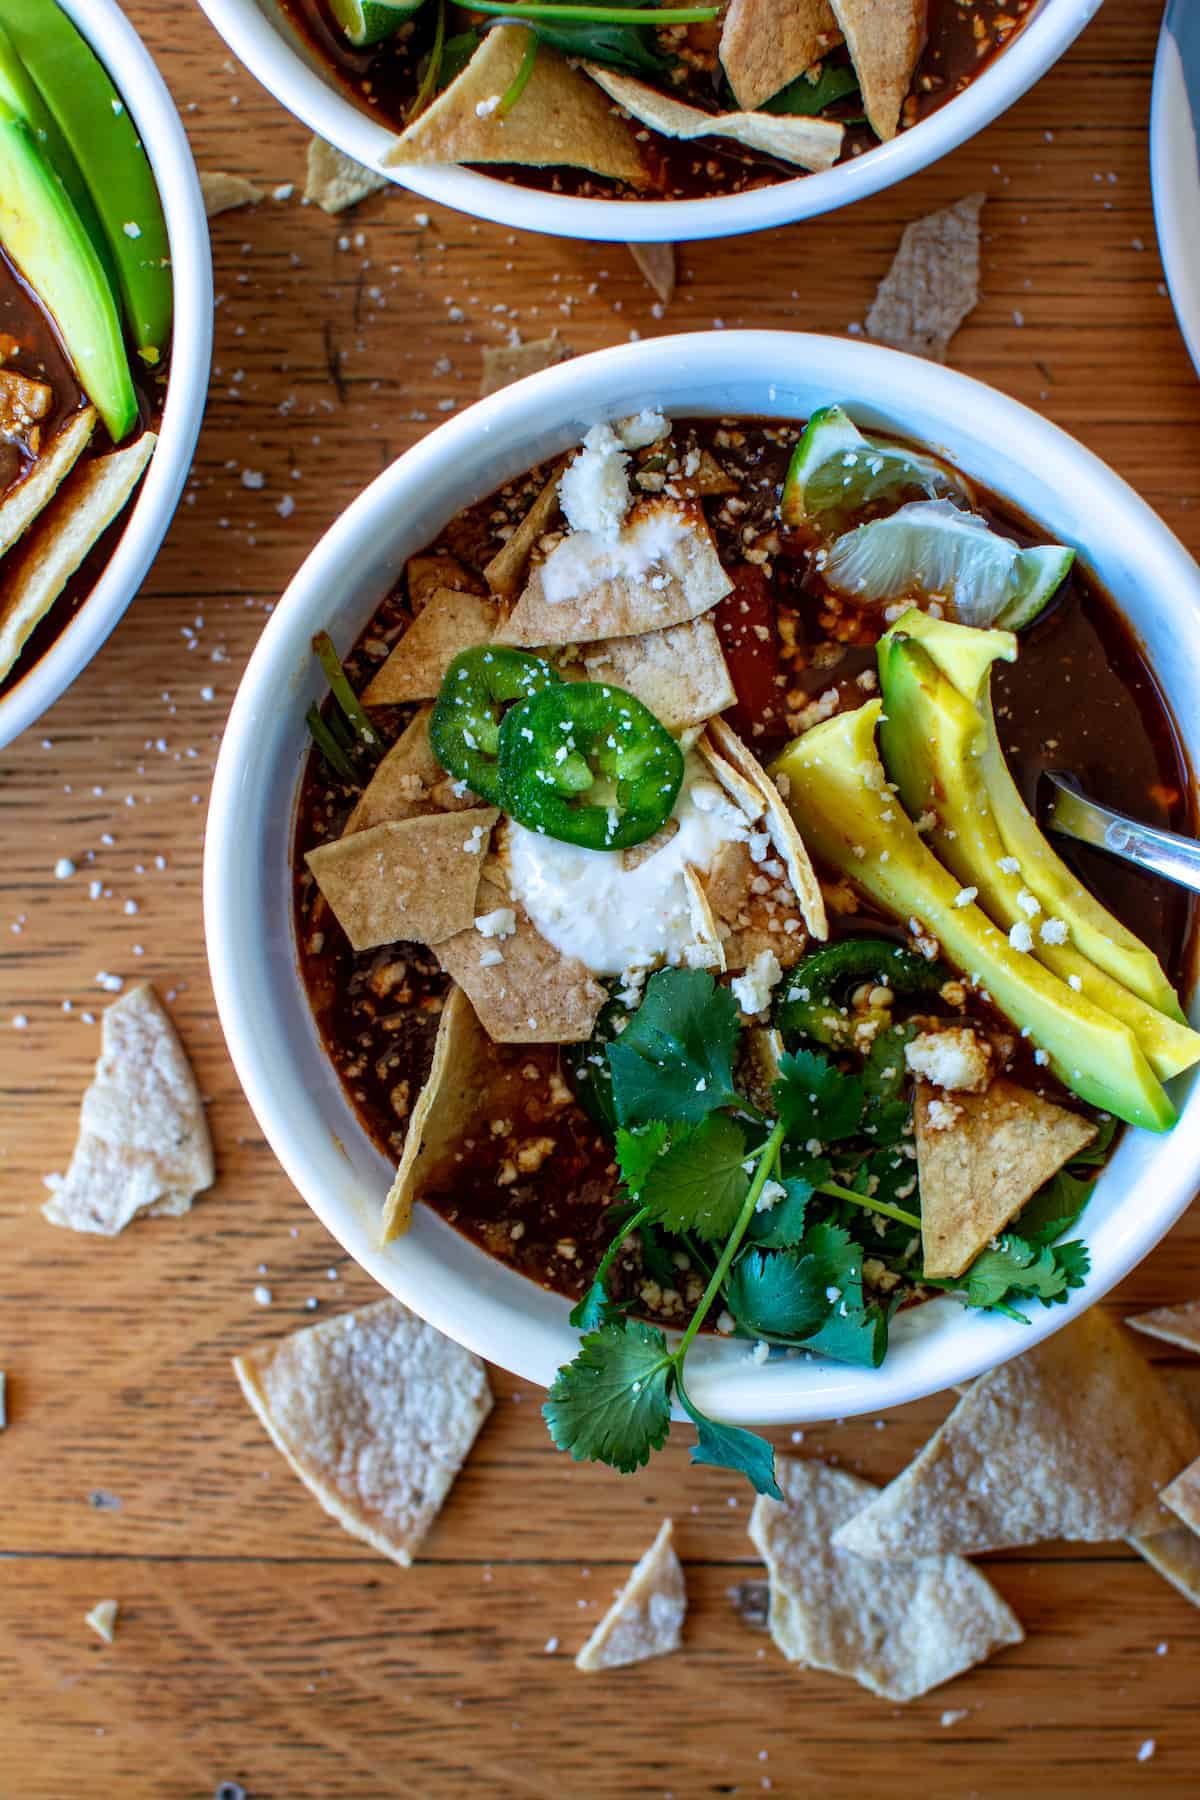 Rich and savory, this simple Instant Pot Chicken Tortilla Soup gets its flavor from a rich chile broth made from charred onions, garlic, tomatoes, and dried guajillo and ancho chiles. The best part? The entire thing from the homemade tortilla chips to the soup can be made in the Instant Pot! #instantpot #chickentortillasoup #tortillasoup #instantpotrecipe